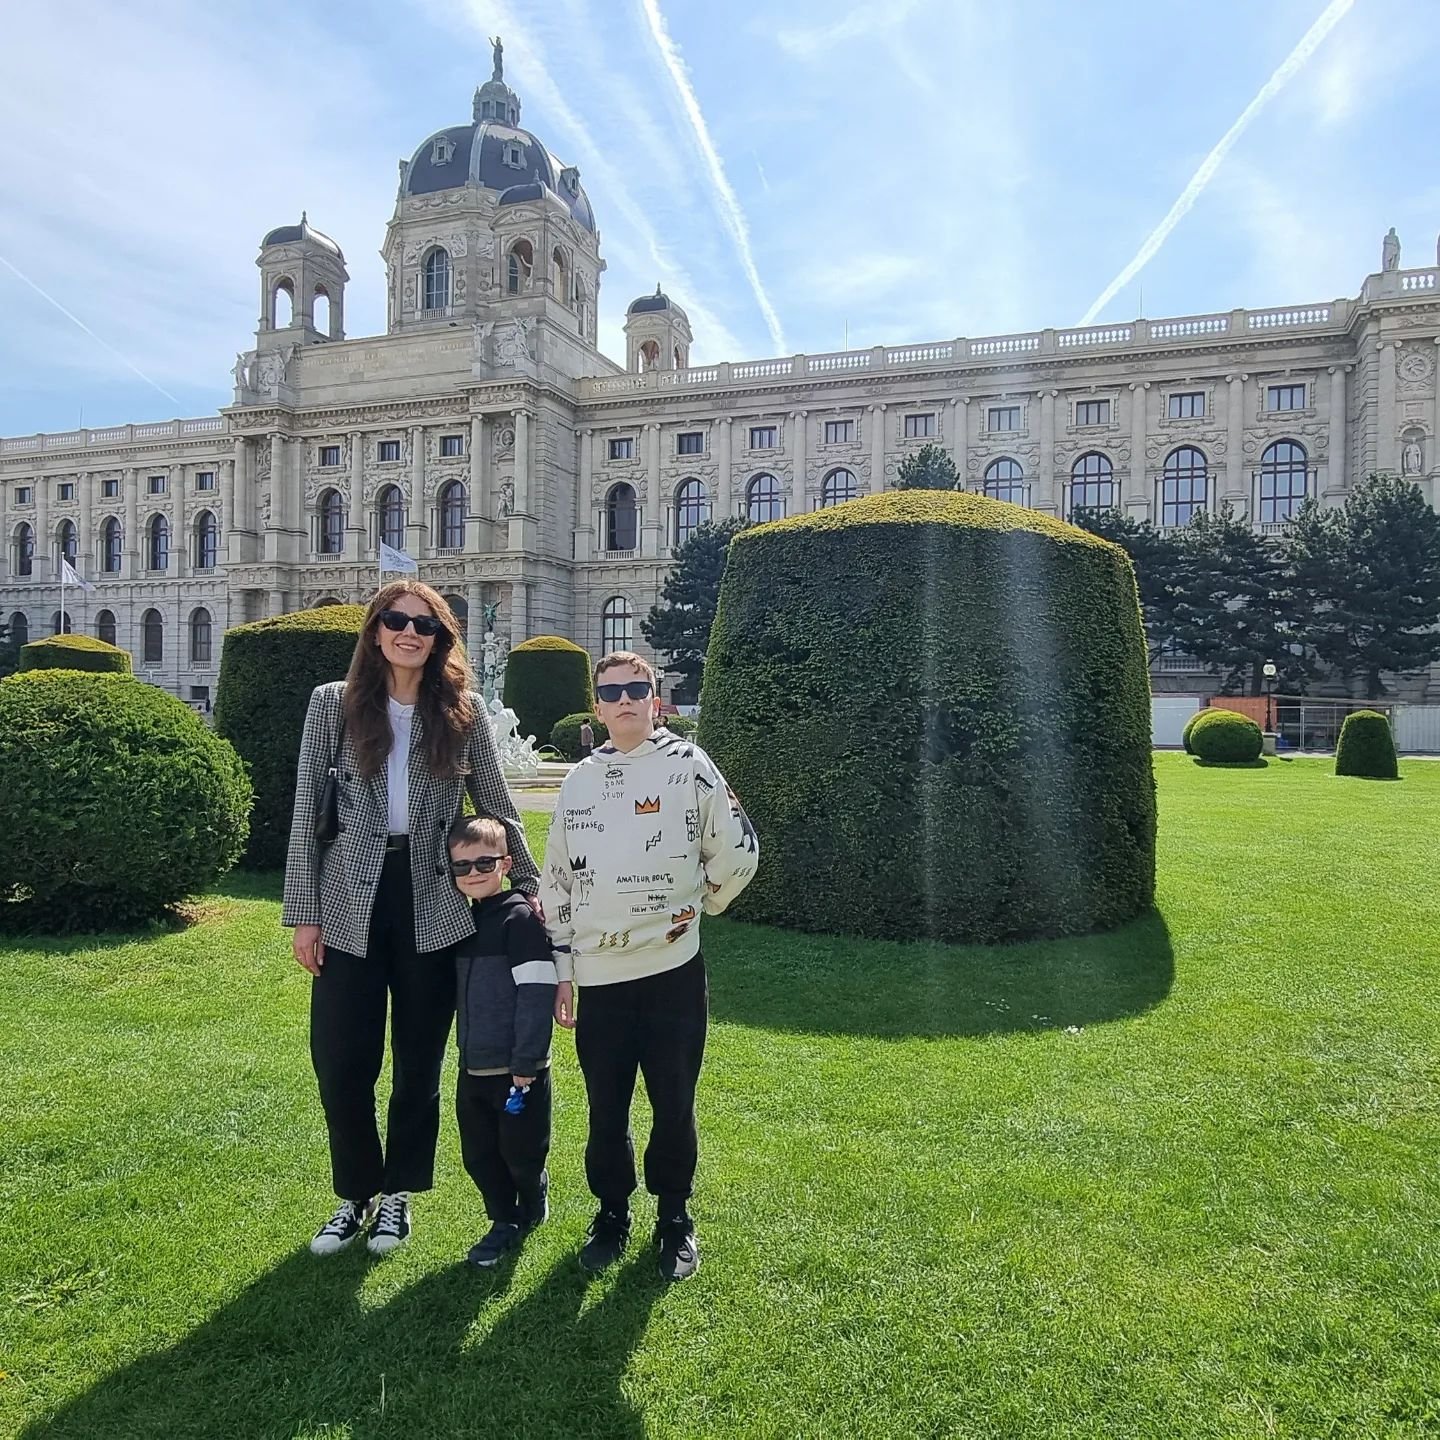 Easter holidays in Vienna.
-
Walked more than 20 000 steps daily.
Ate a lot!
Hugged our @lena_weissenbacher and her family of 6 a lot!
Really enjoyed this trip with the kids.❤️